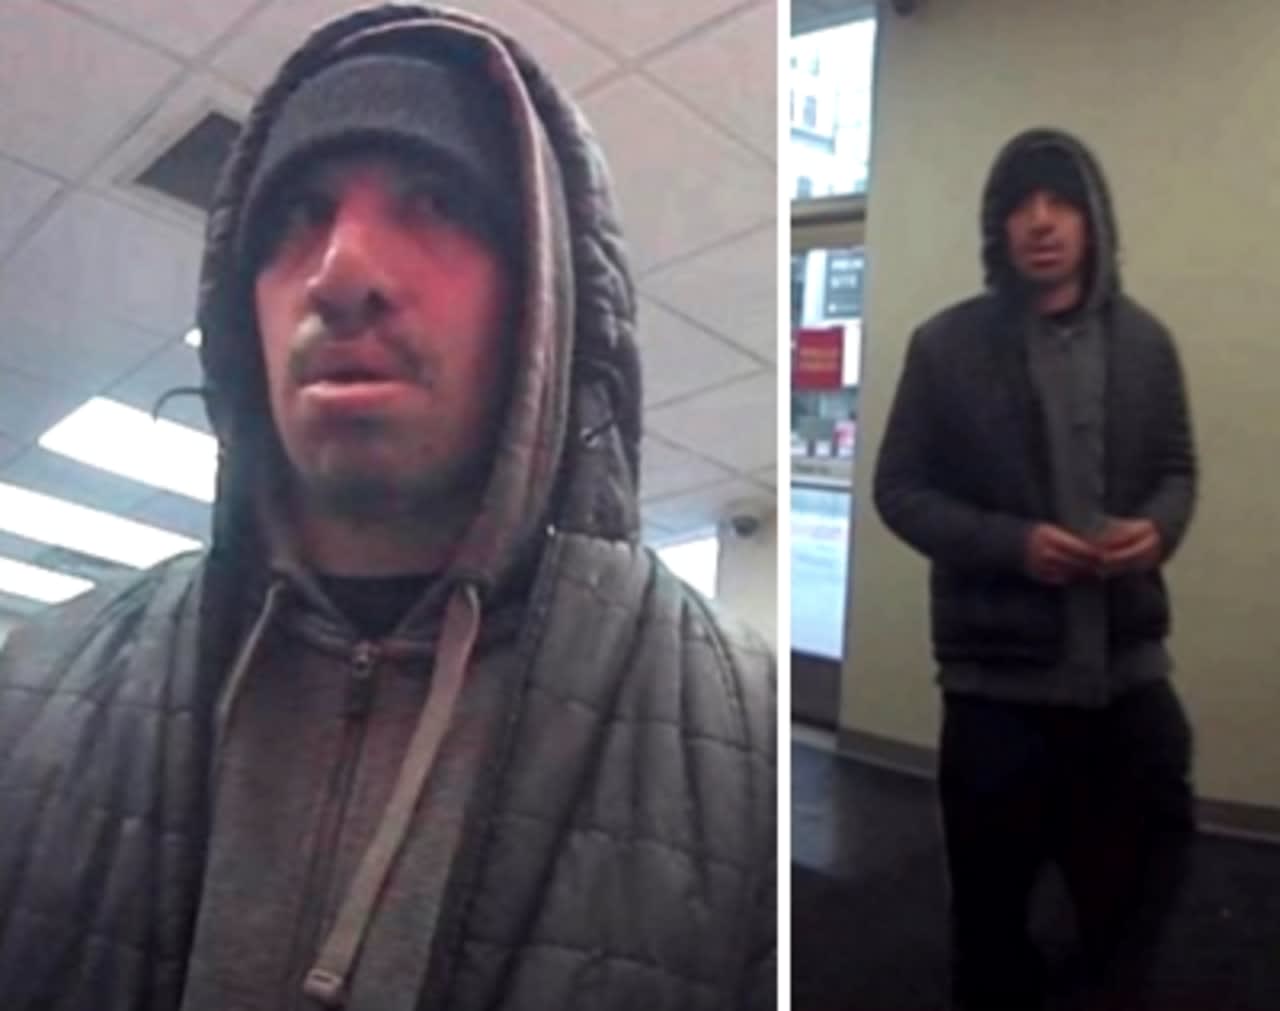 Authorities are seeking the public's help identifying a man they say stole cash from a victim who was using an ATM.